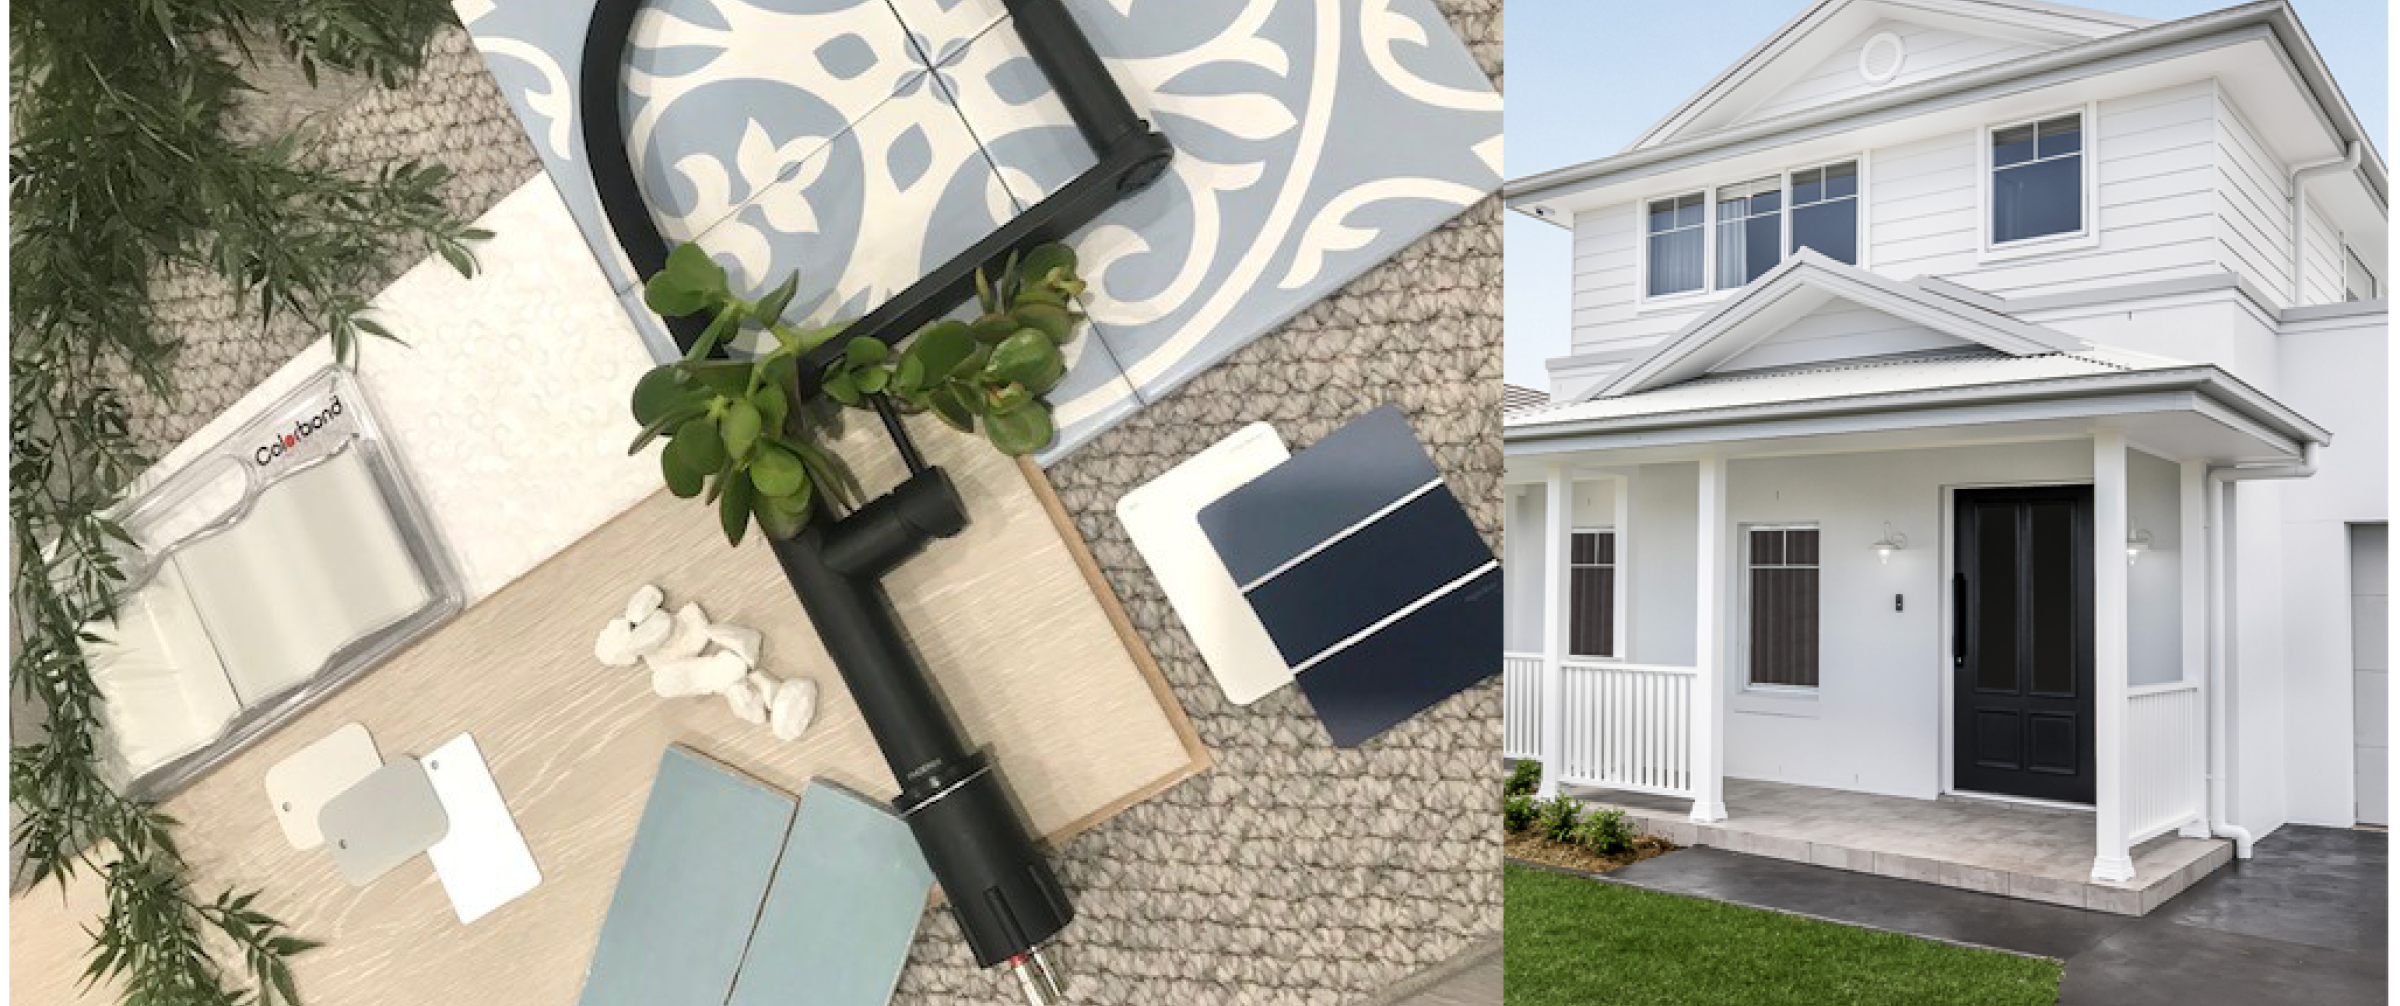 Natural Luxury Hamptons Flatlay' by Edgecliff Homes.  COLORBOND® steel in the colour Shale Grey® was selected for the roofing.